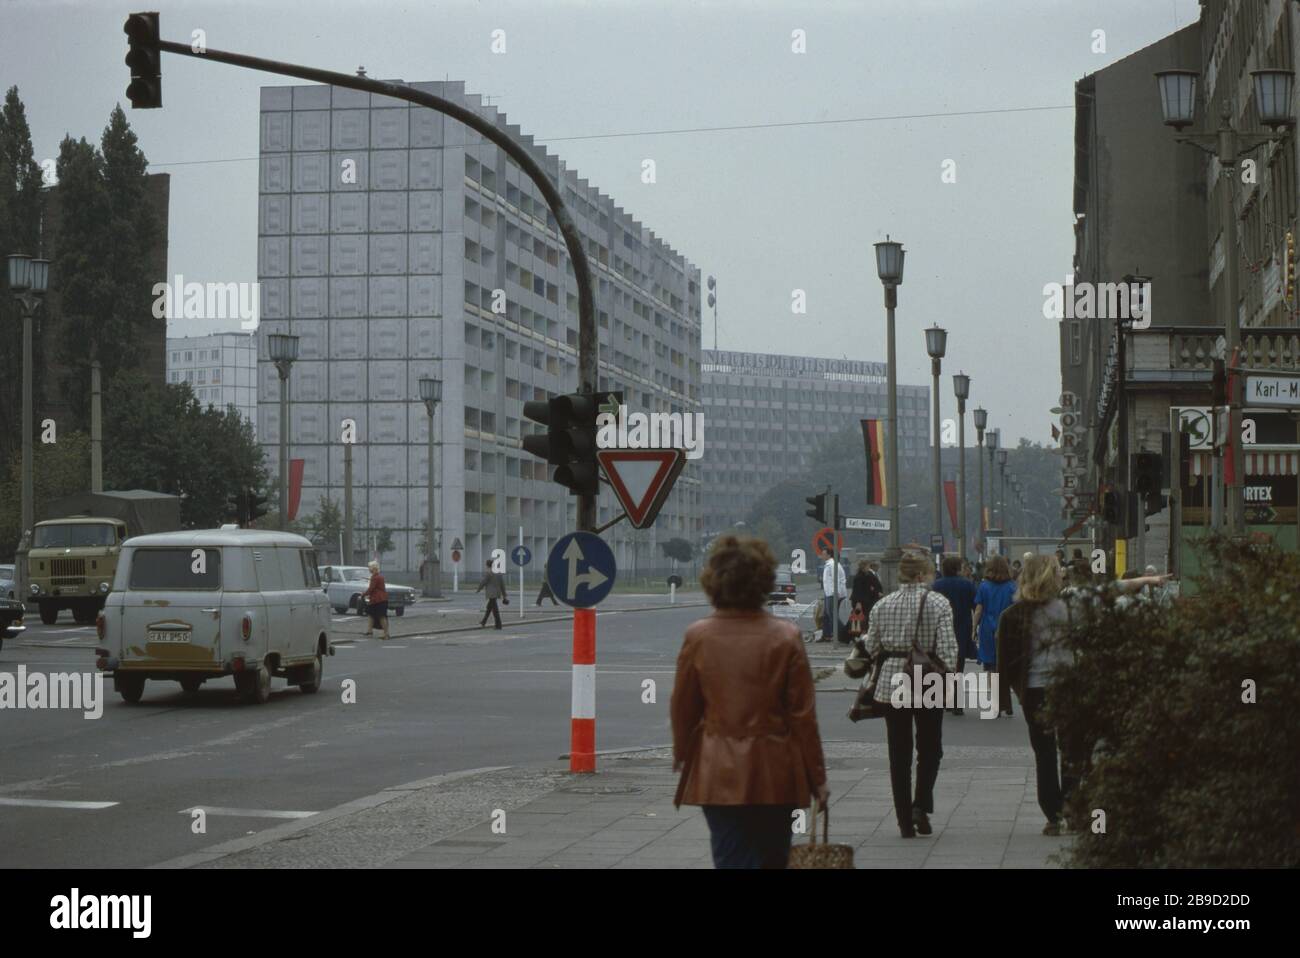 Pedestrians walk across the intersection of Straße der Pariser Kommune / Karl-Marx-Allee, which is decorated with GDR and red (Soviet) flags - the publishing building of the New Germany is visible in the background. [automated translation] Stock Photo